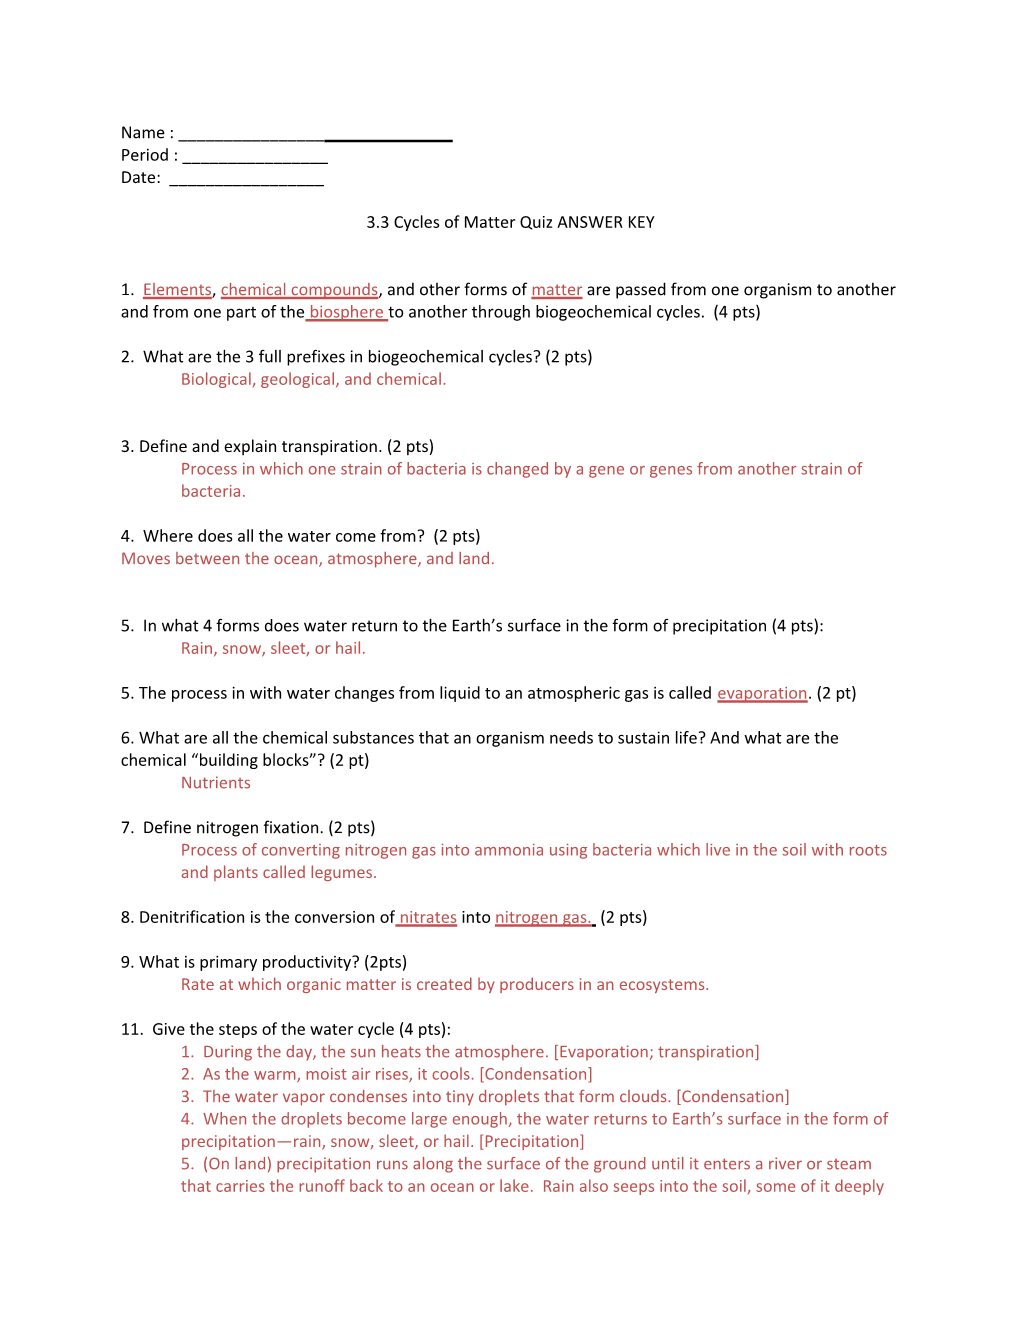 3.3 Cycles of Matter Quiz ANSWER KEY